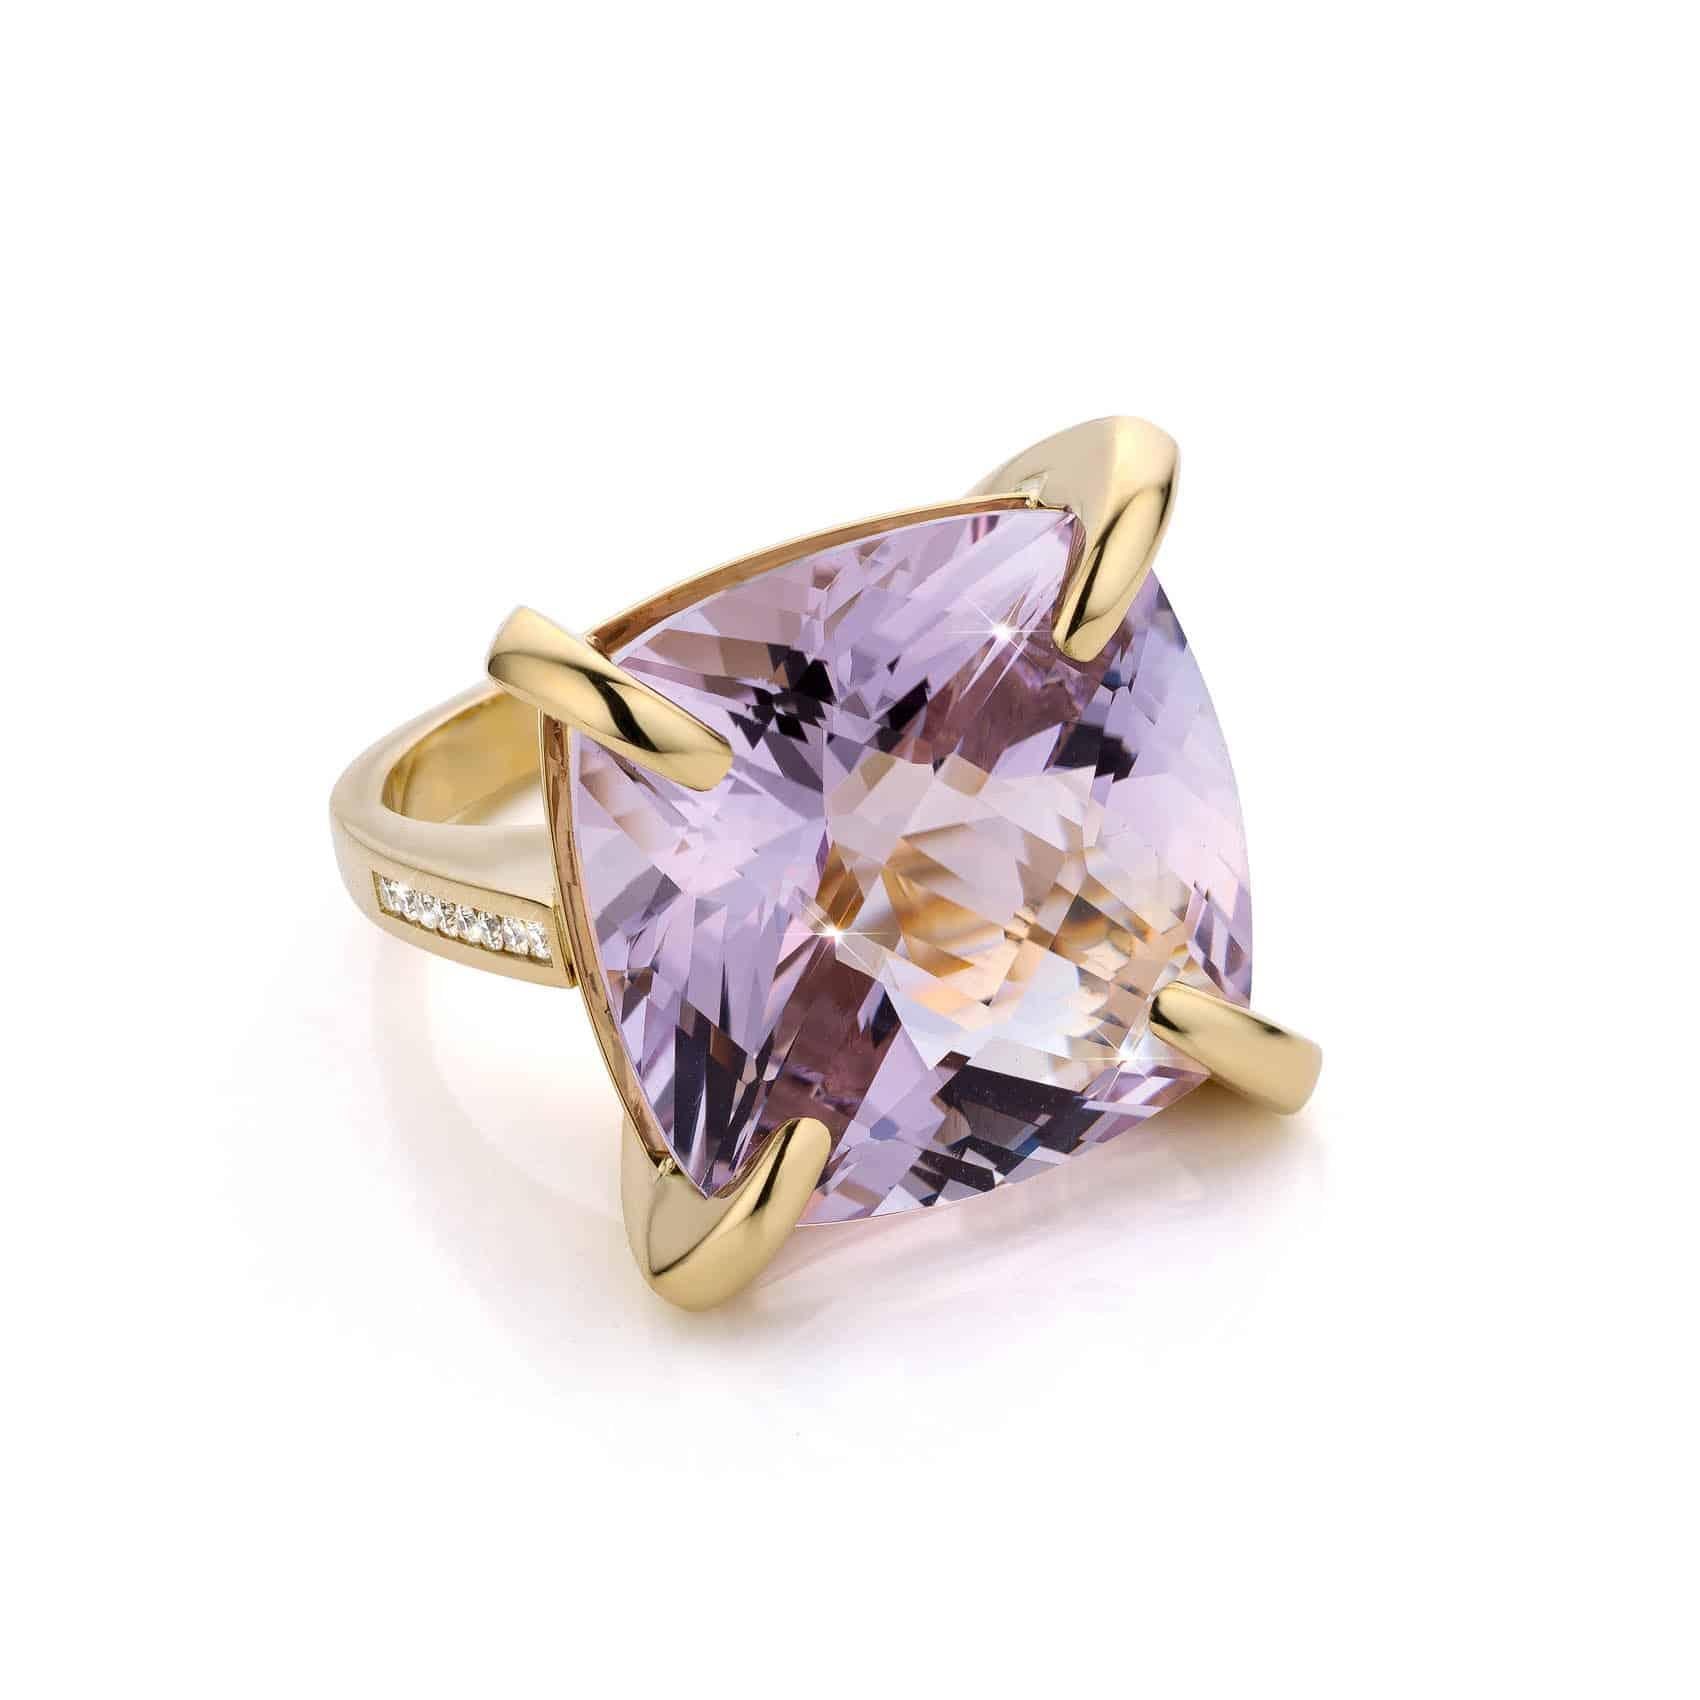 For Sale:  Cober Jewellery “Purple unique sparkling Amethist” of 13.3 Carat YellowGold Ring 4